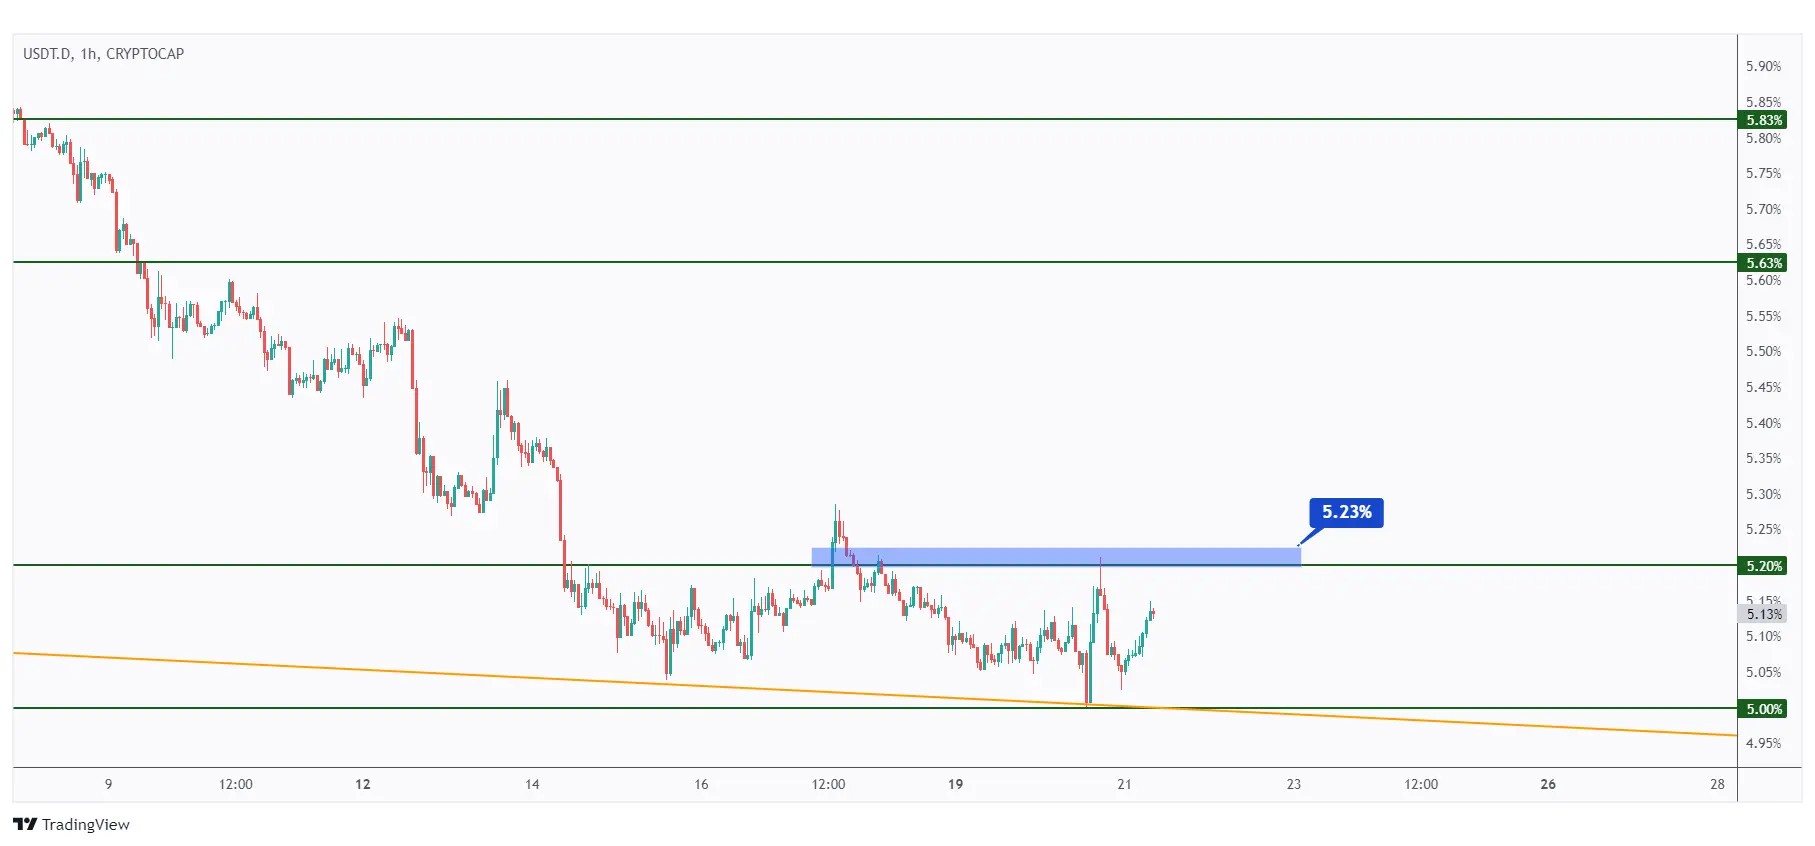 USDT dominance 1h chart awaiting for a break above 5.23% for the bulls to take over.